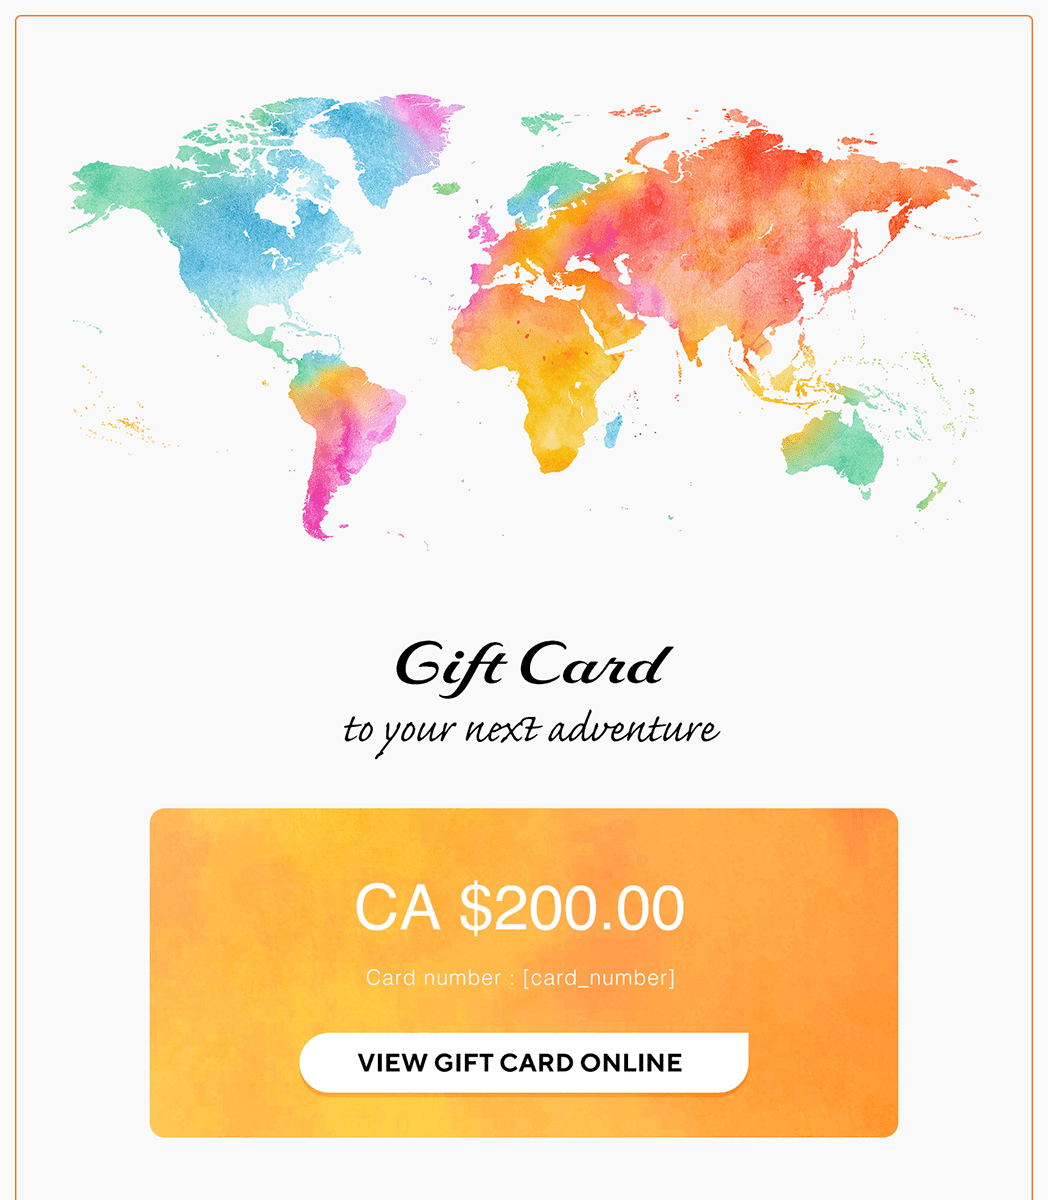 Gift Card to your next adventure